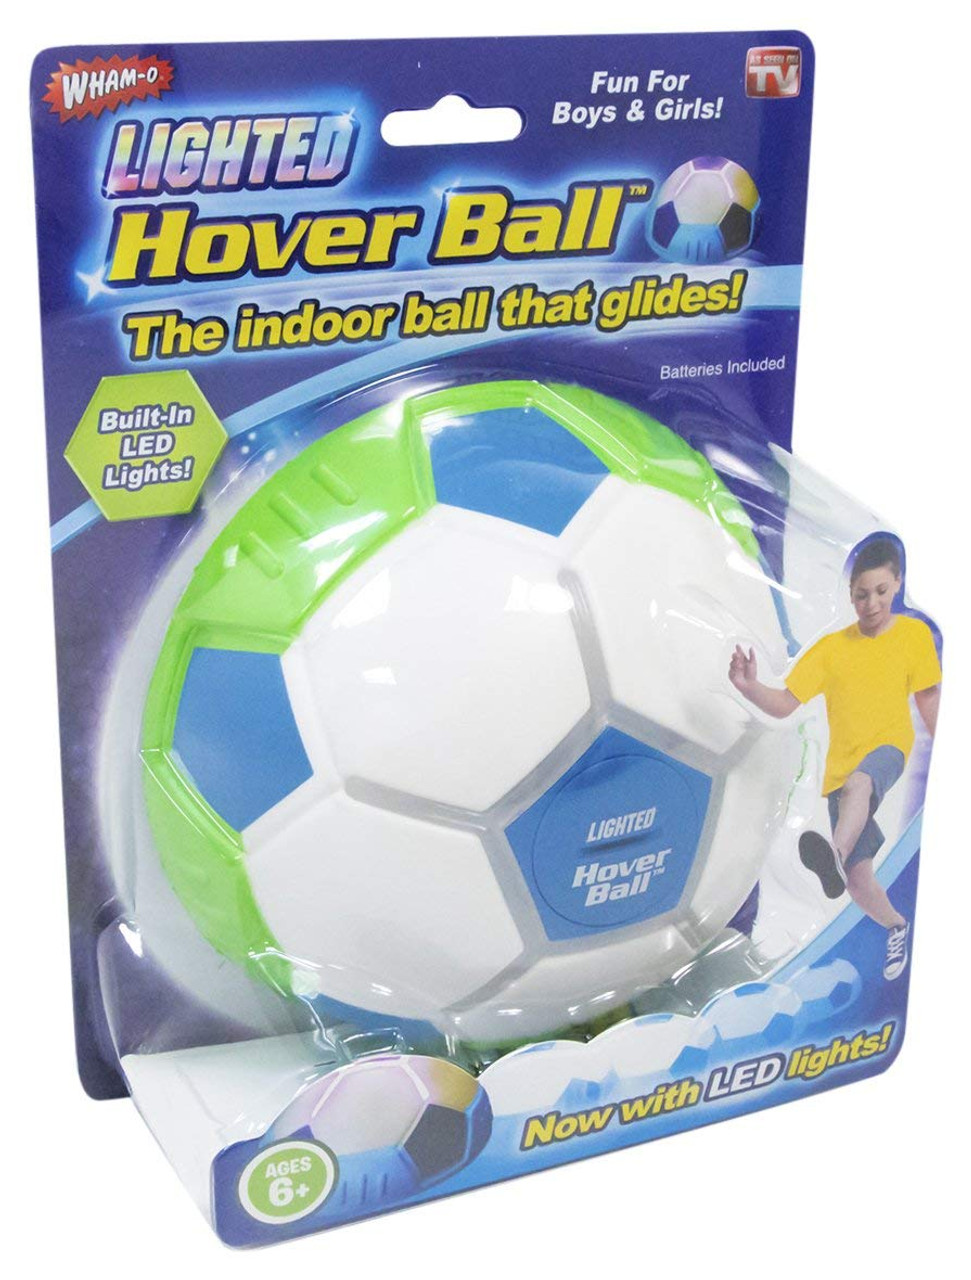 Wham-O Lighted Hover Ball - Double Play